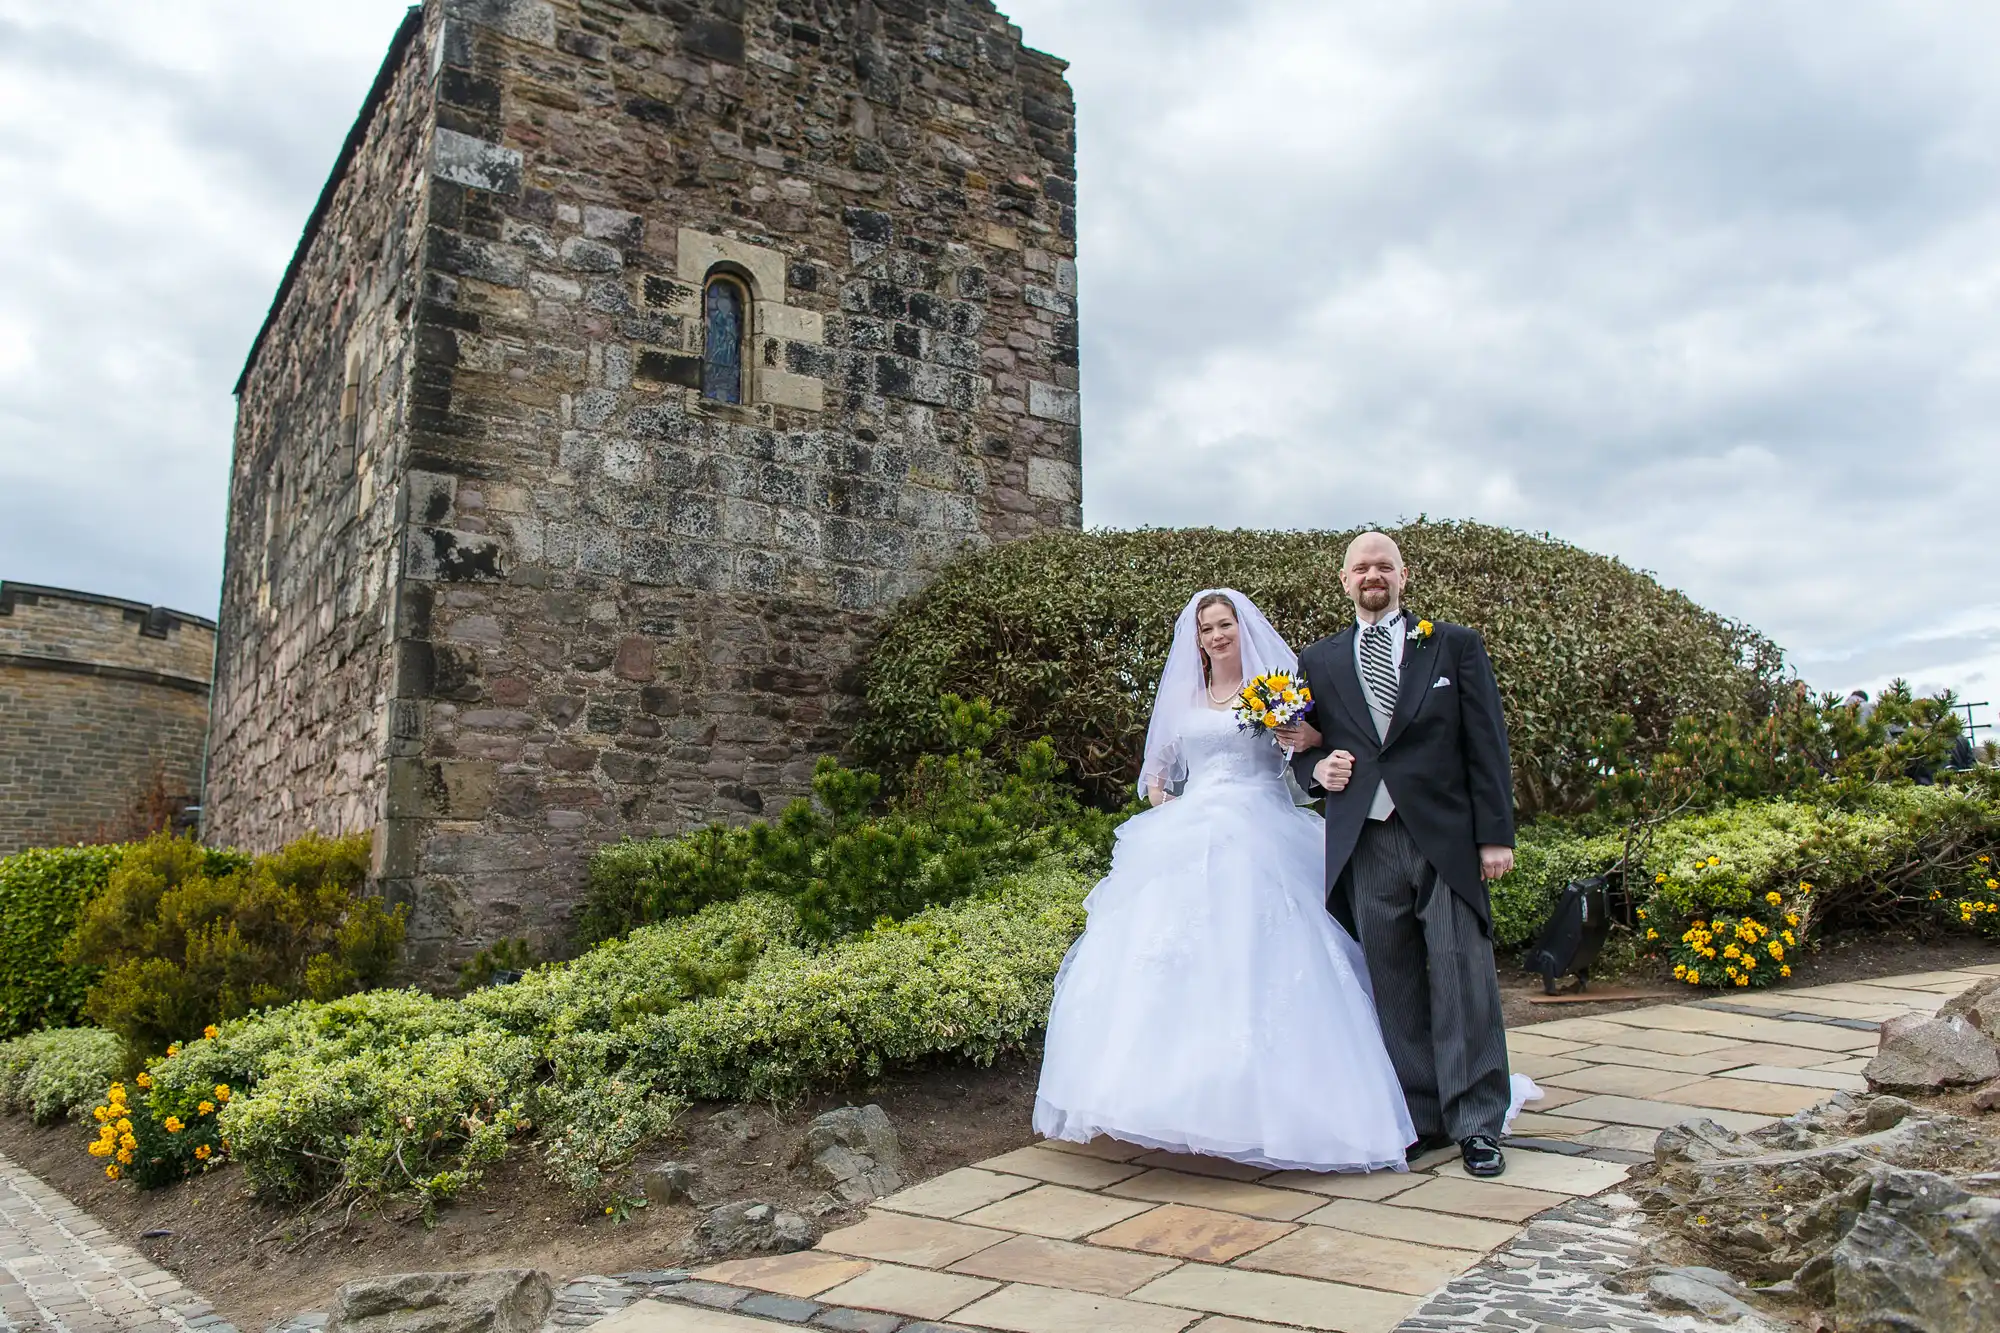 A bride in a white gown and a groom in a suit holding hands in a garden with a historic stone tower in the background.